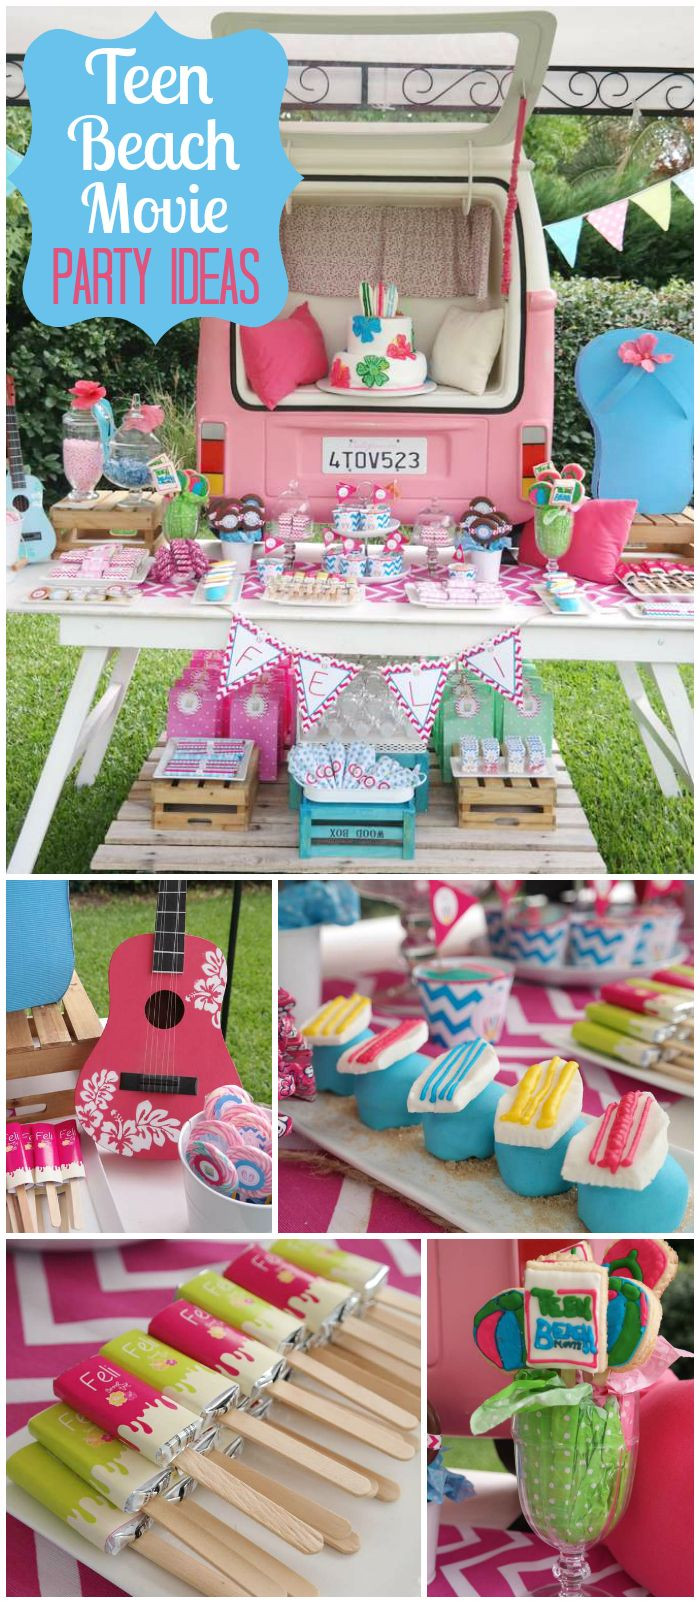 Summer Birthday Party Ideas For Teens
 Pin on Girl Birthday Party Ideas & Themes